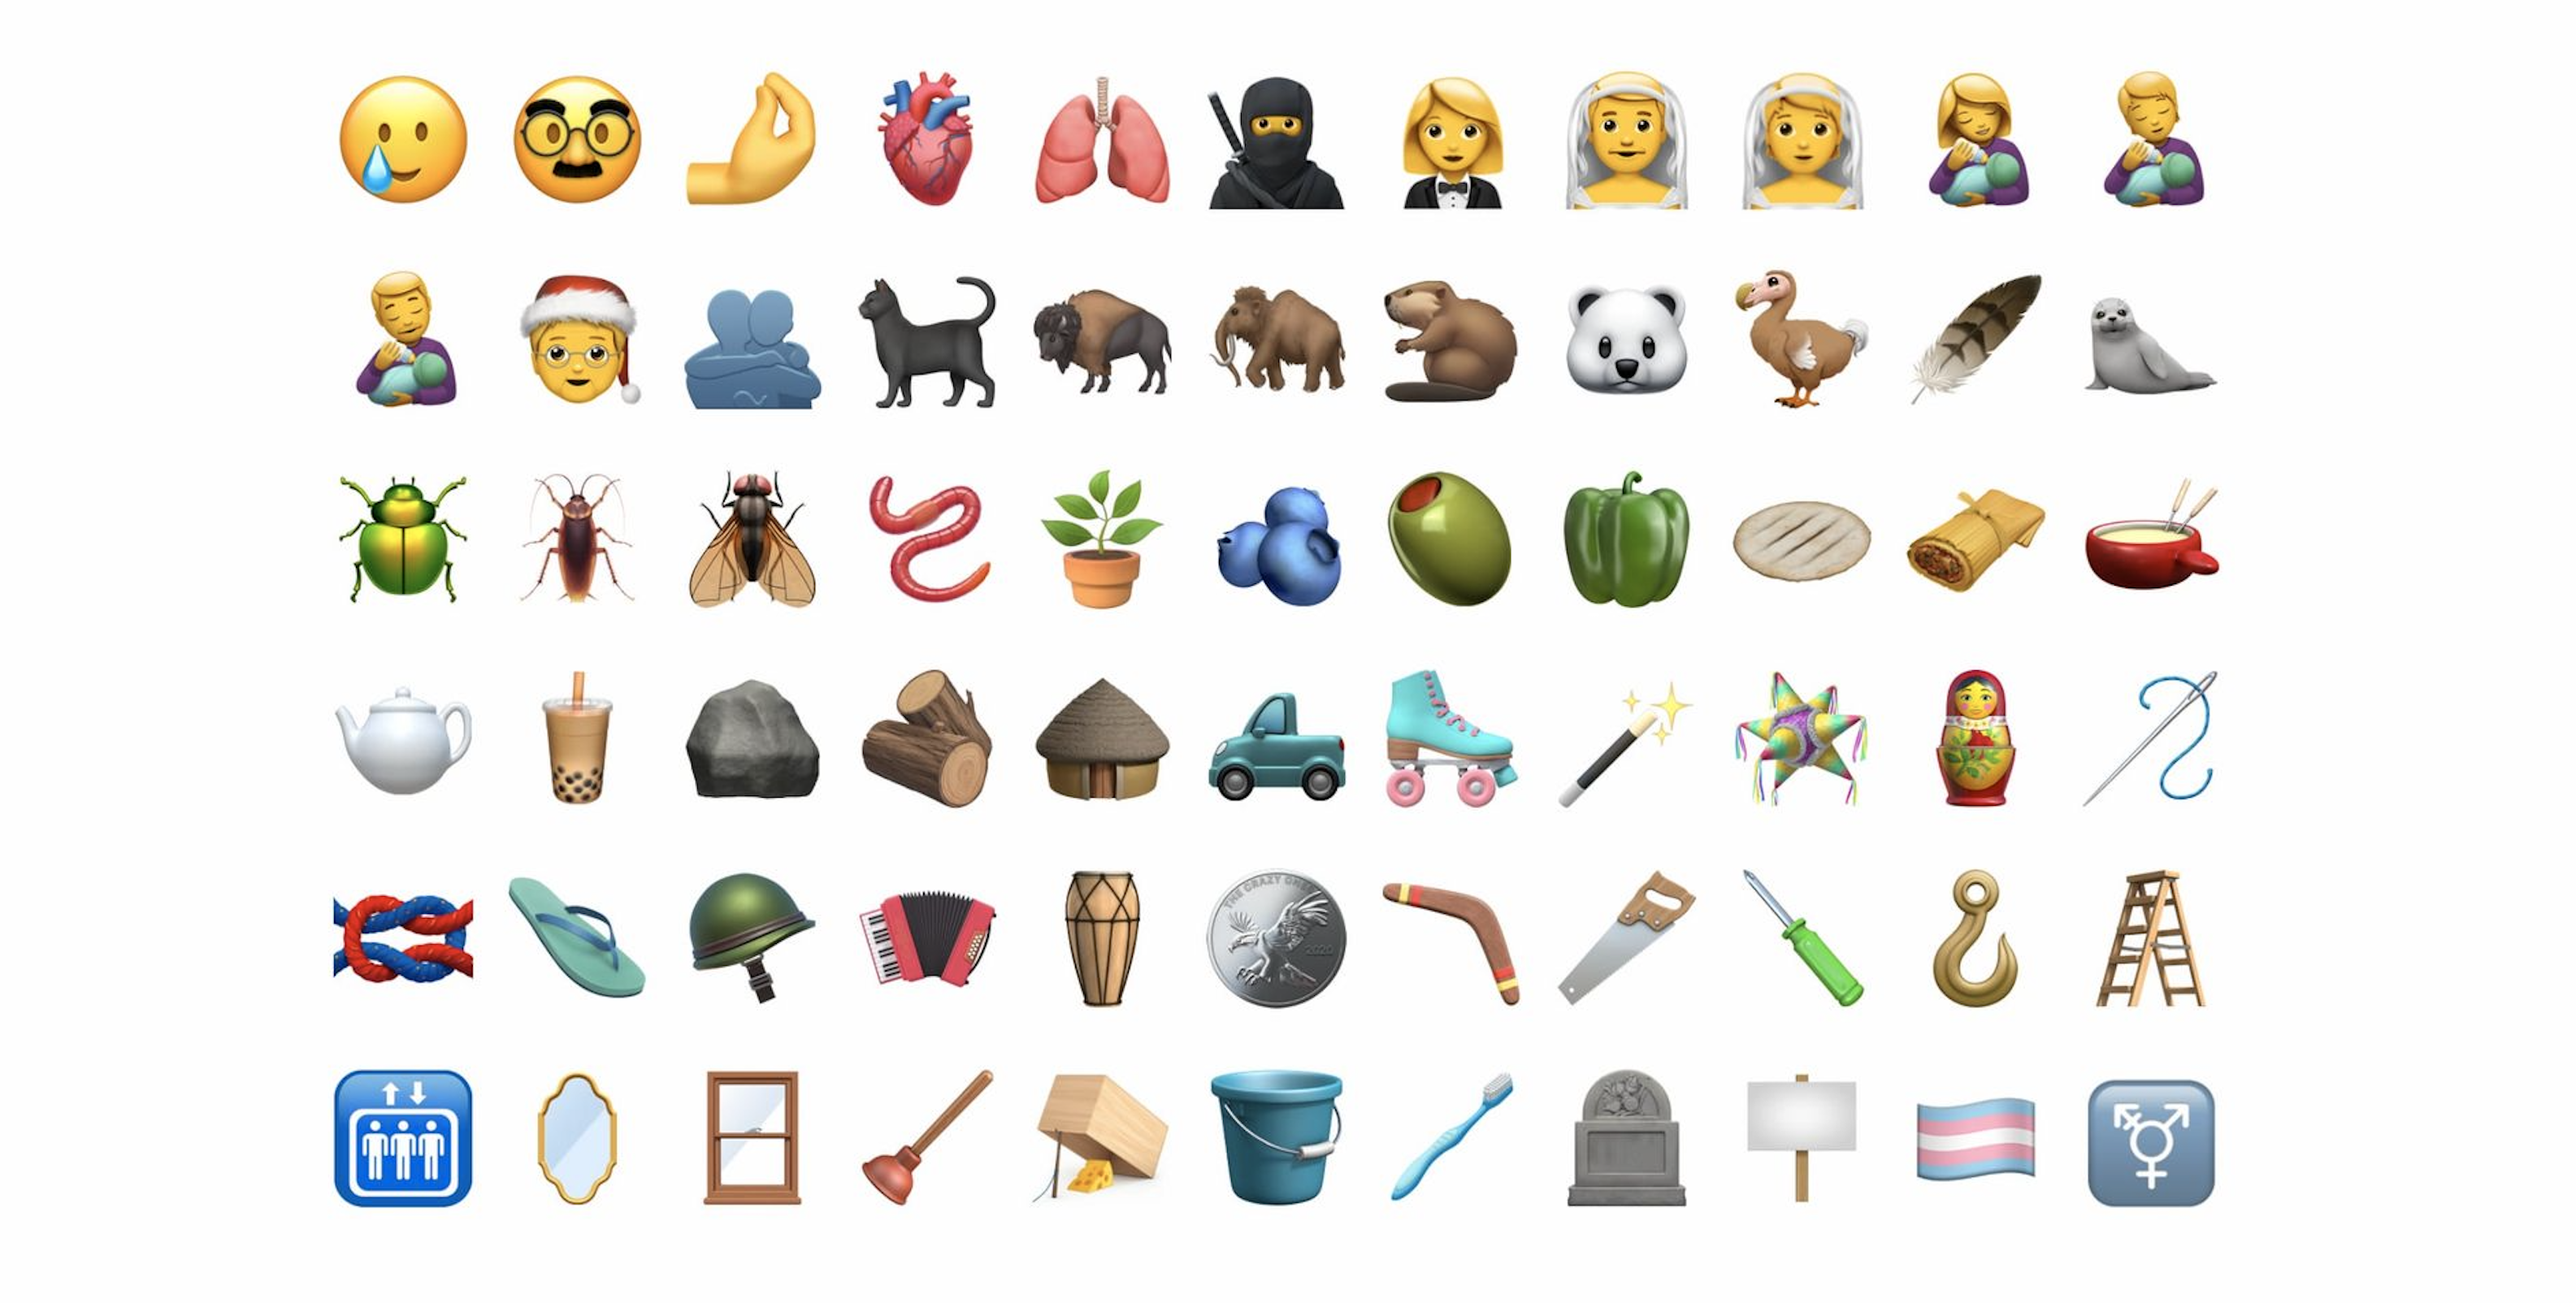 photo of Apple releases second public beta of iOS 14.2 with new emoji and more image